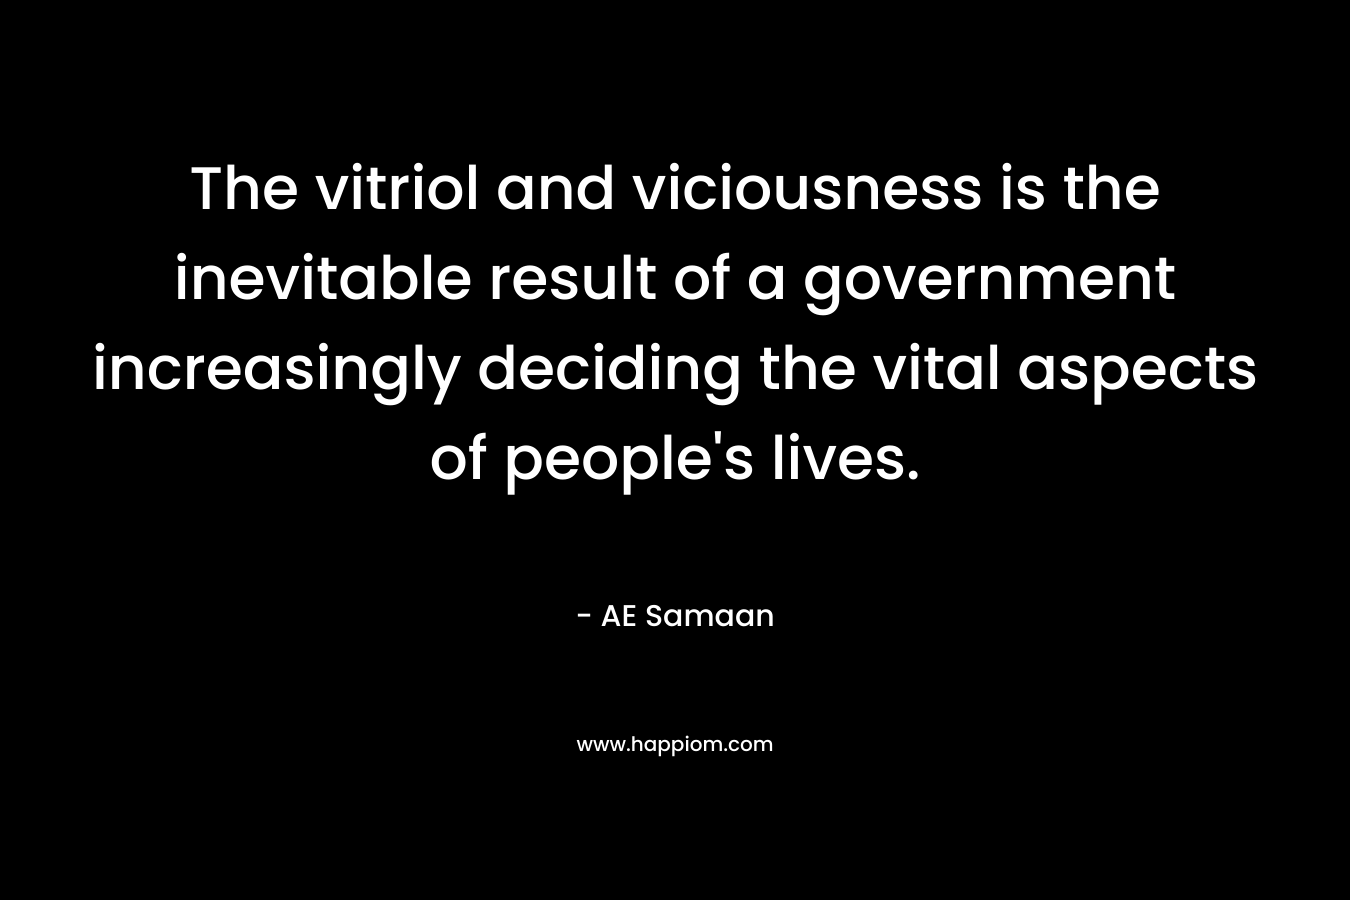 The vitriol and viciousness is the inevitable result of a government increasingly deciding the vital aspects of people’s lives. – AE Samaan